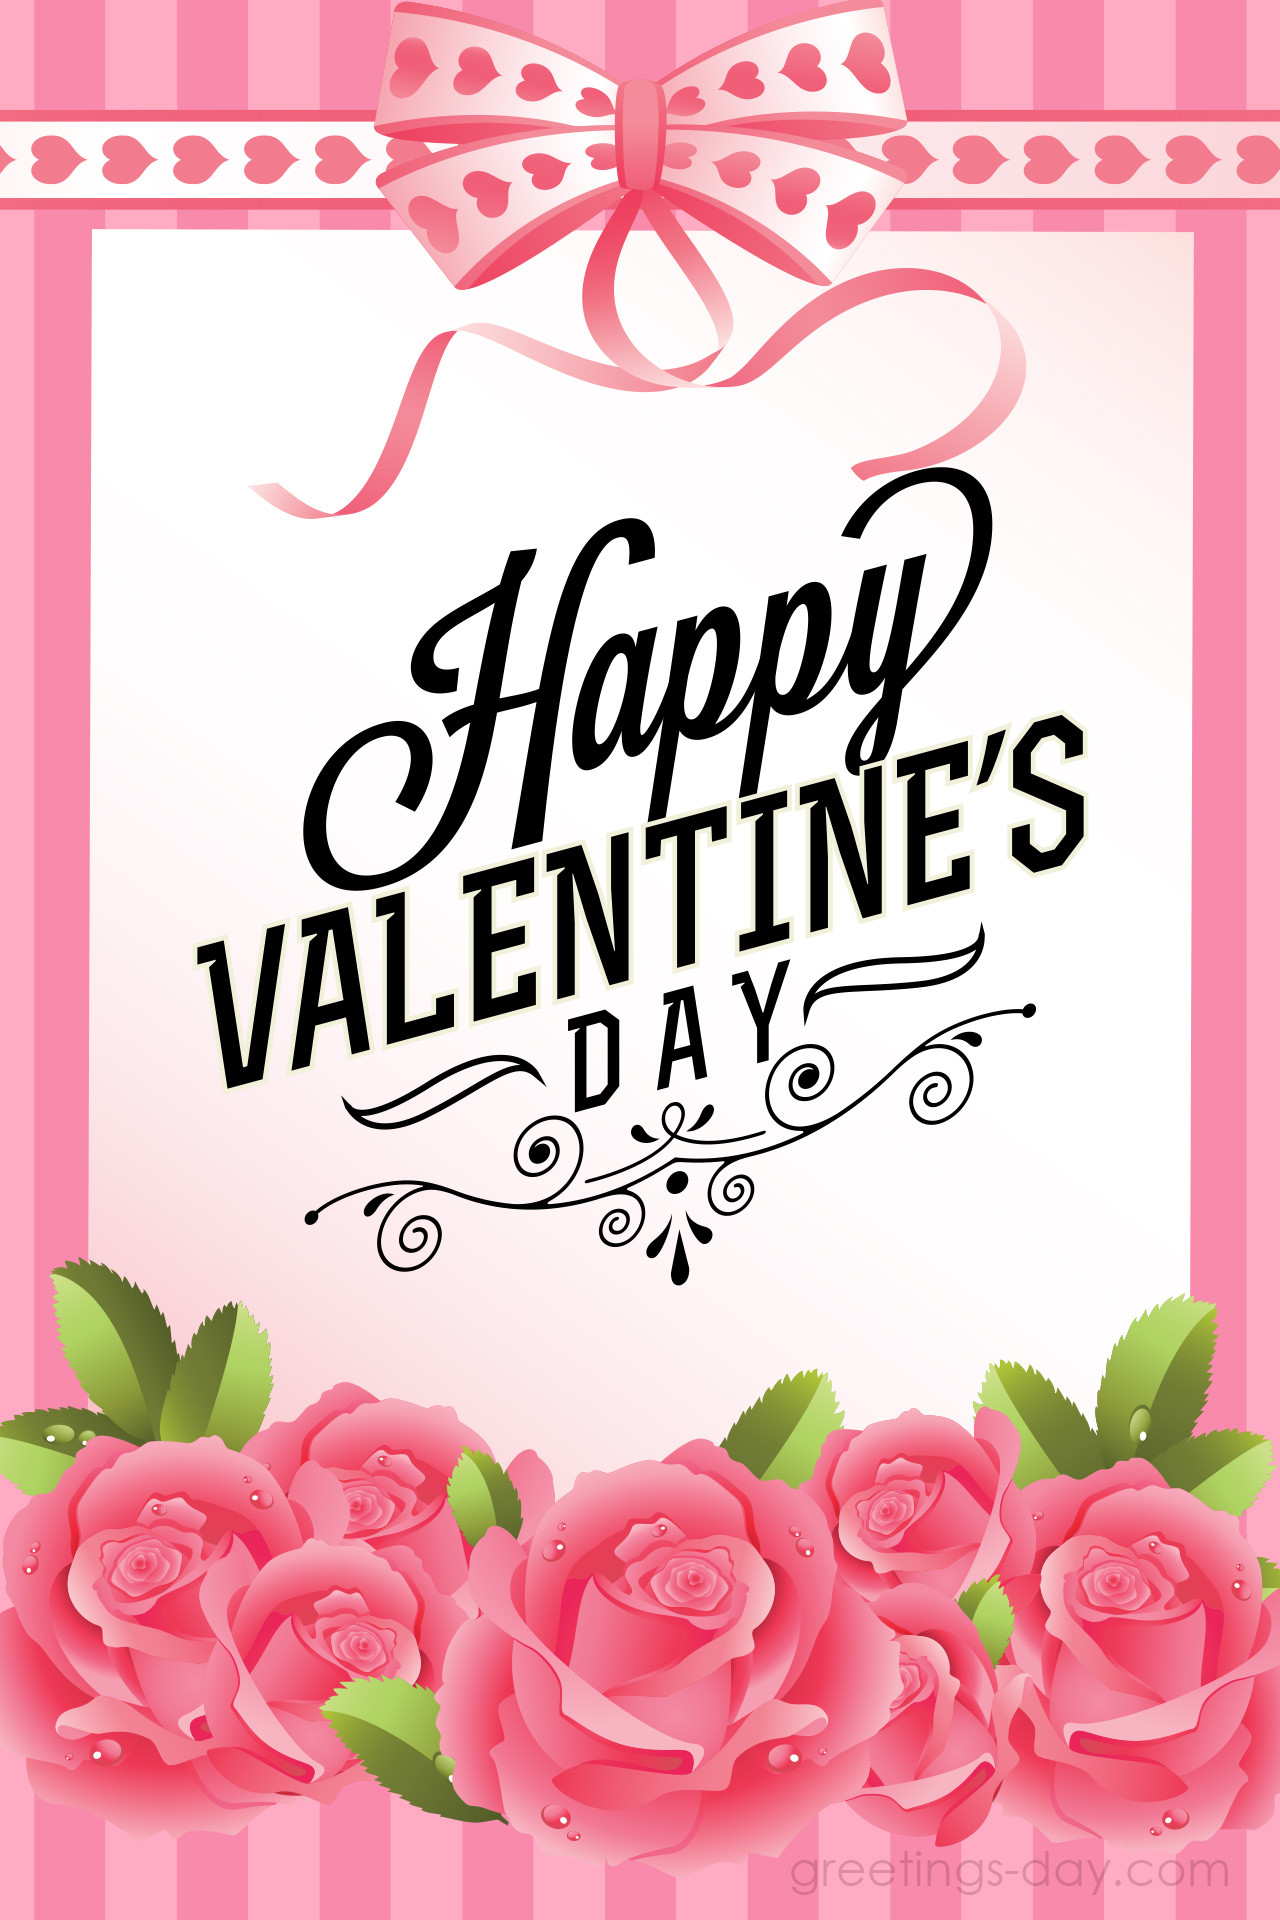 Valentines Quotes For Family
 Valentine s Day Quotes and Flowers for Friends and Family